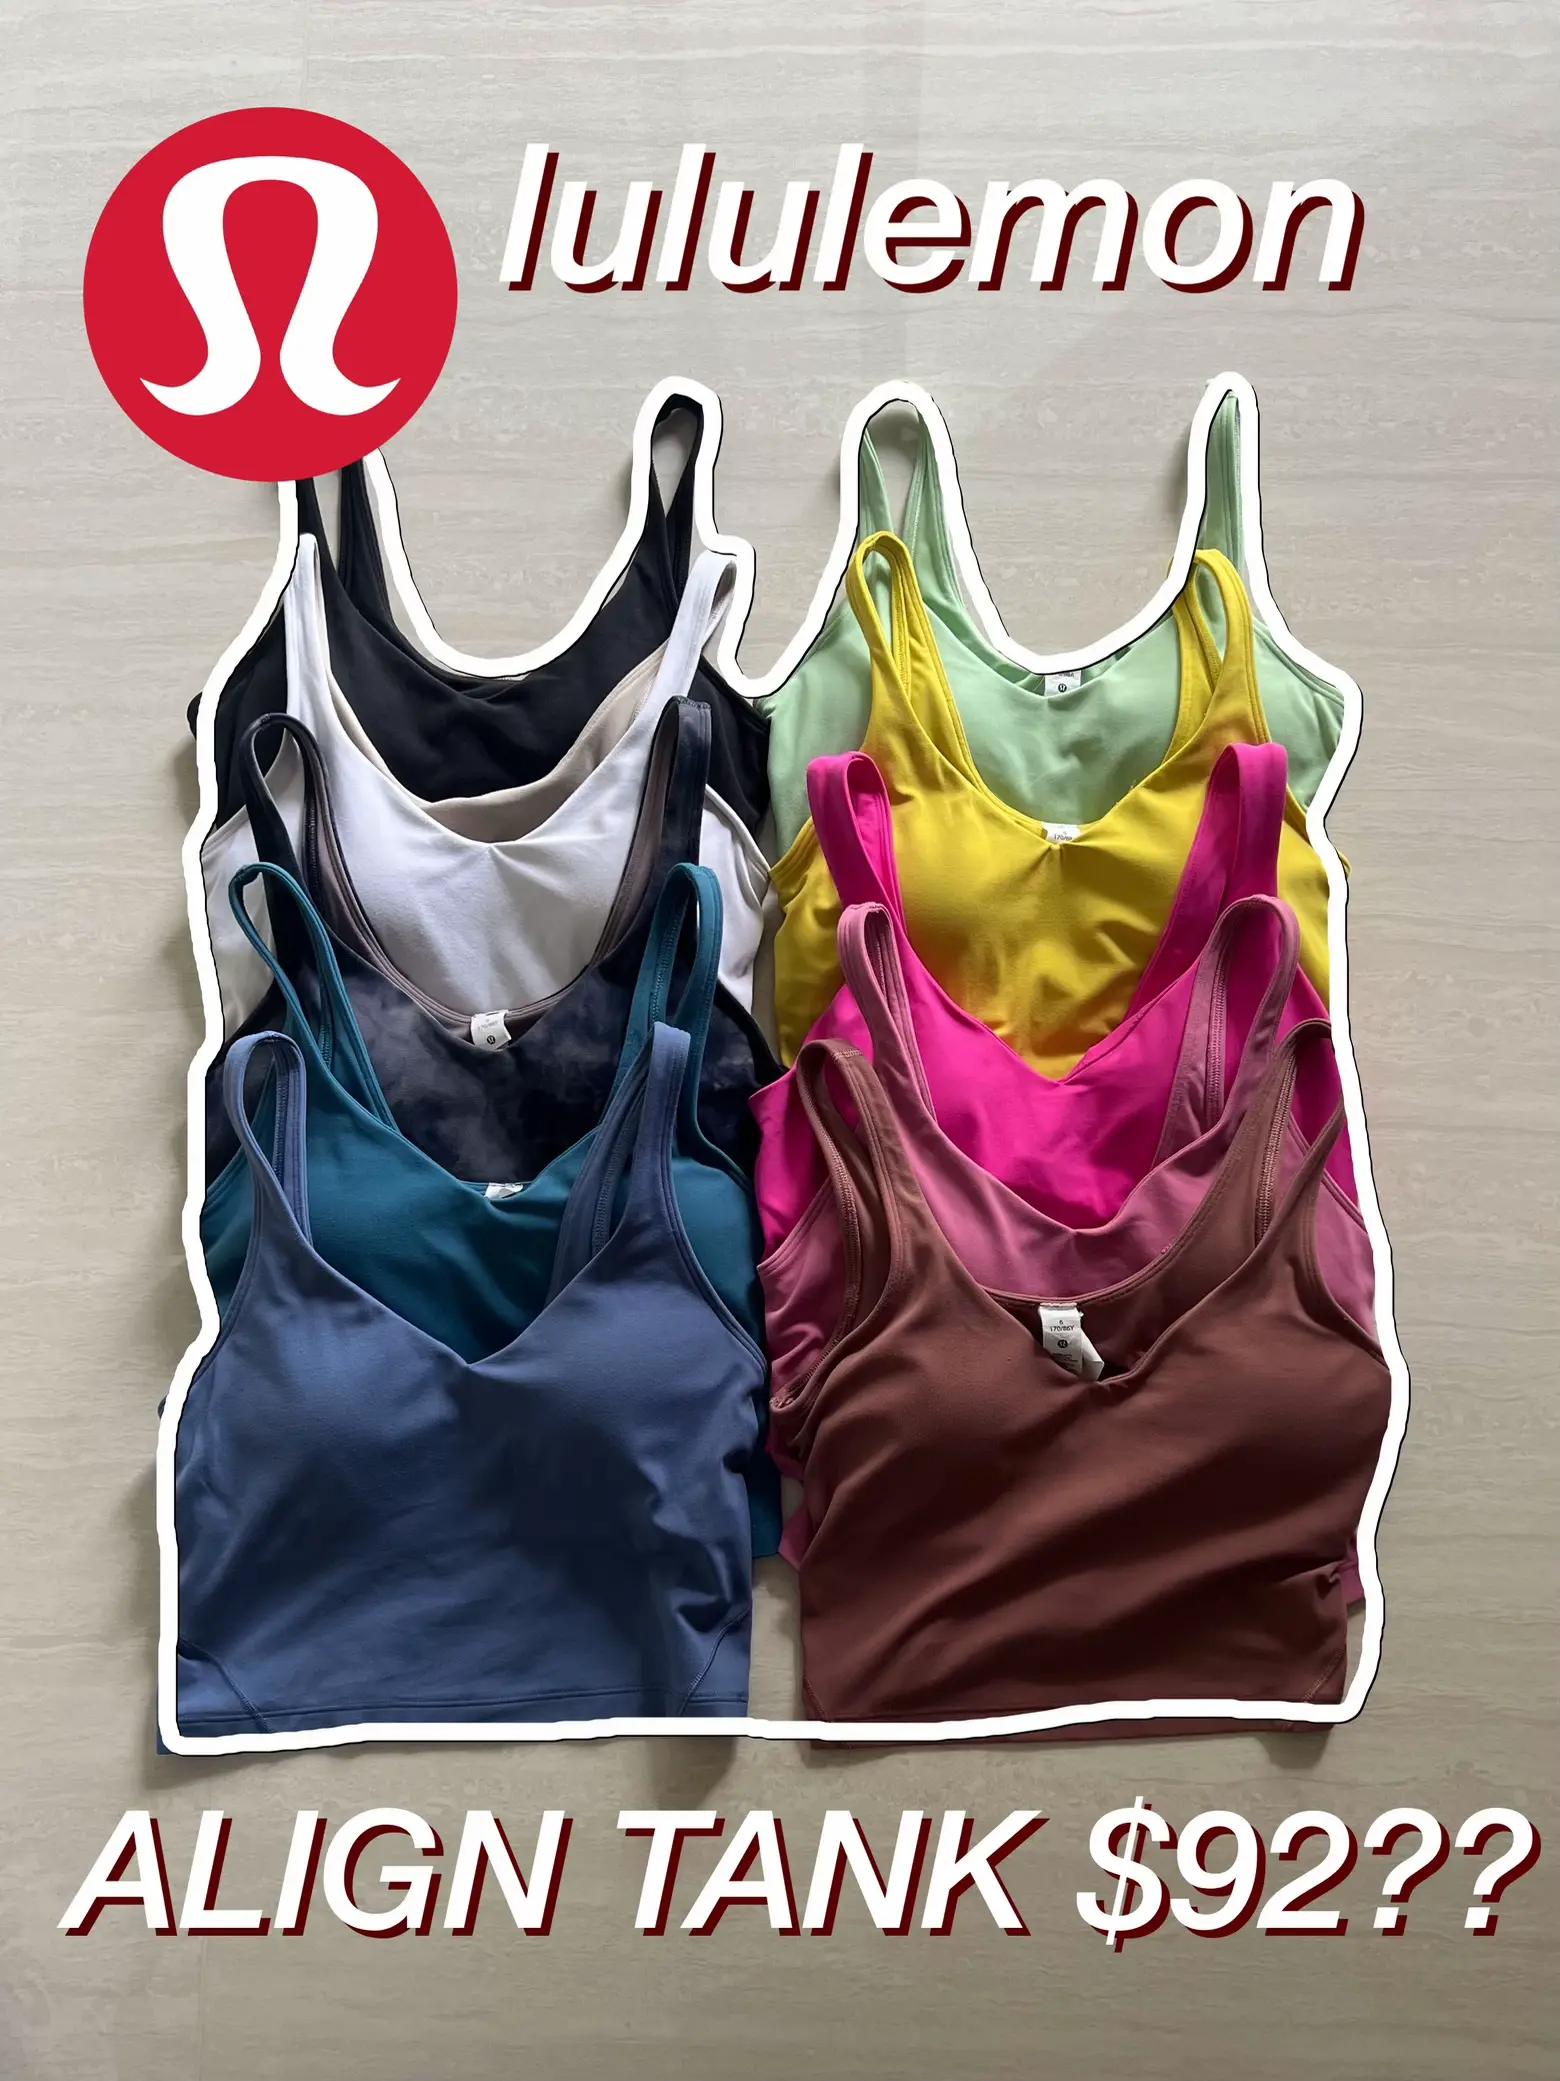 my lululemon align tank collection 🫣, Gallery posted by ✿ drew ✿